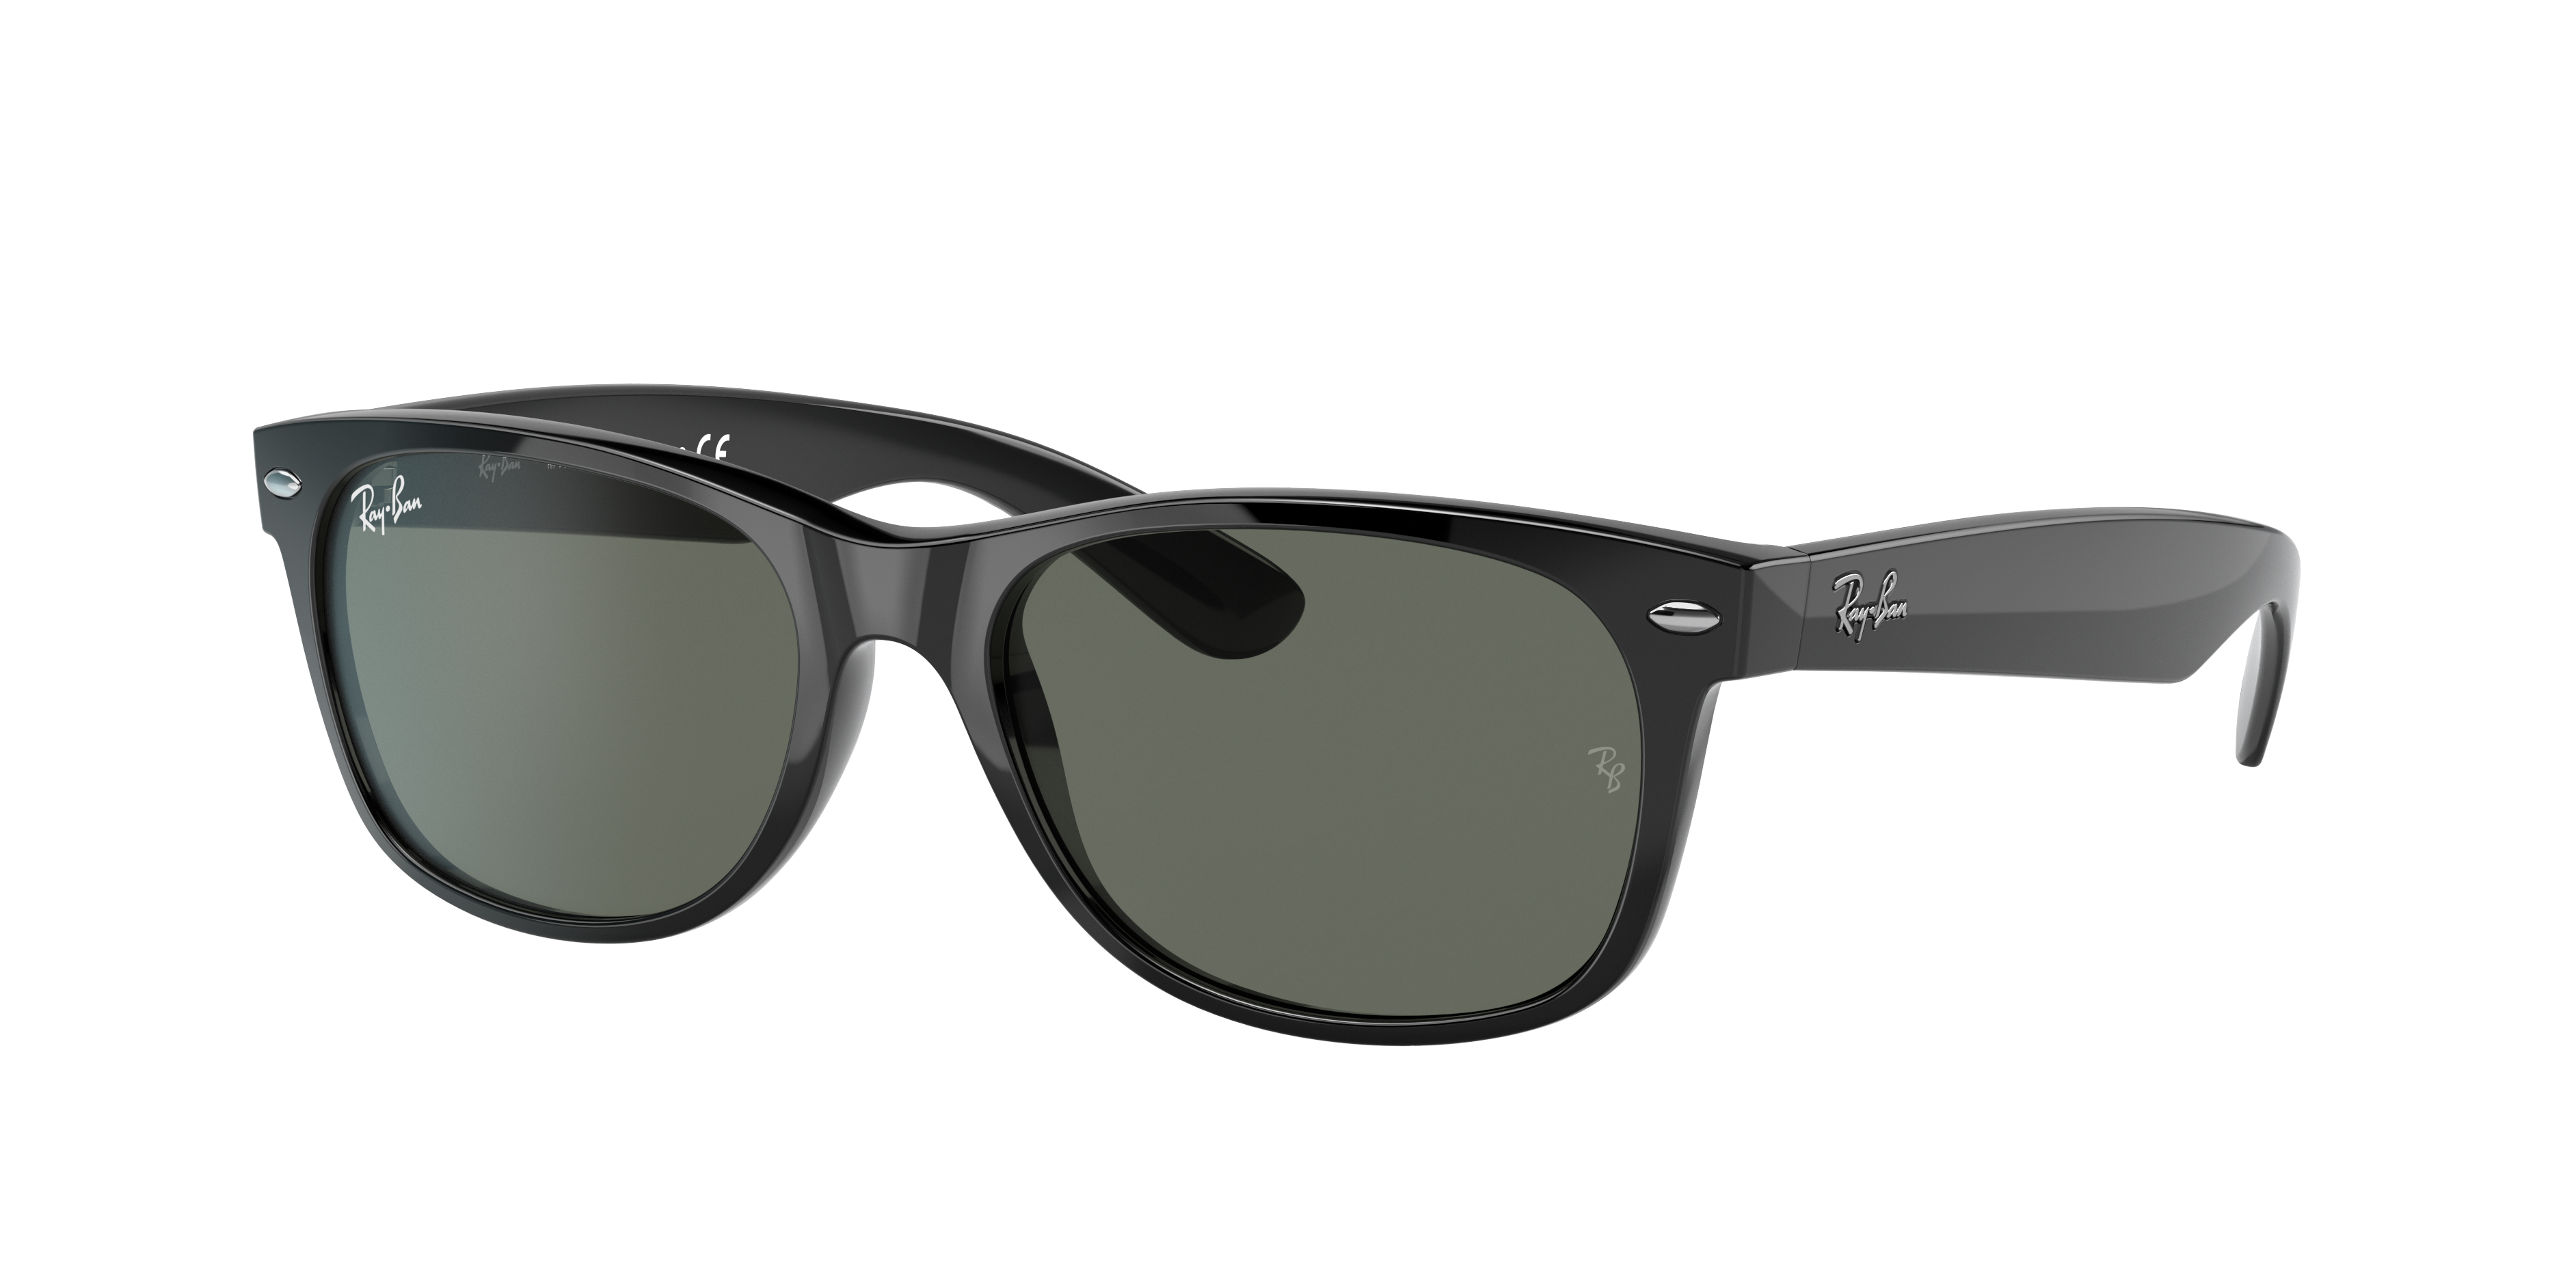 Standaard vork Monumentaal New Wayfarer Classic Sunglasses in Black and Green - RB2132 | Ray-Ban® US